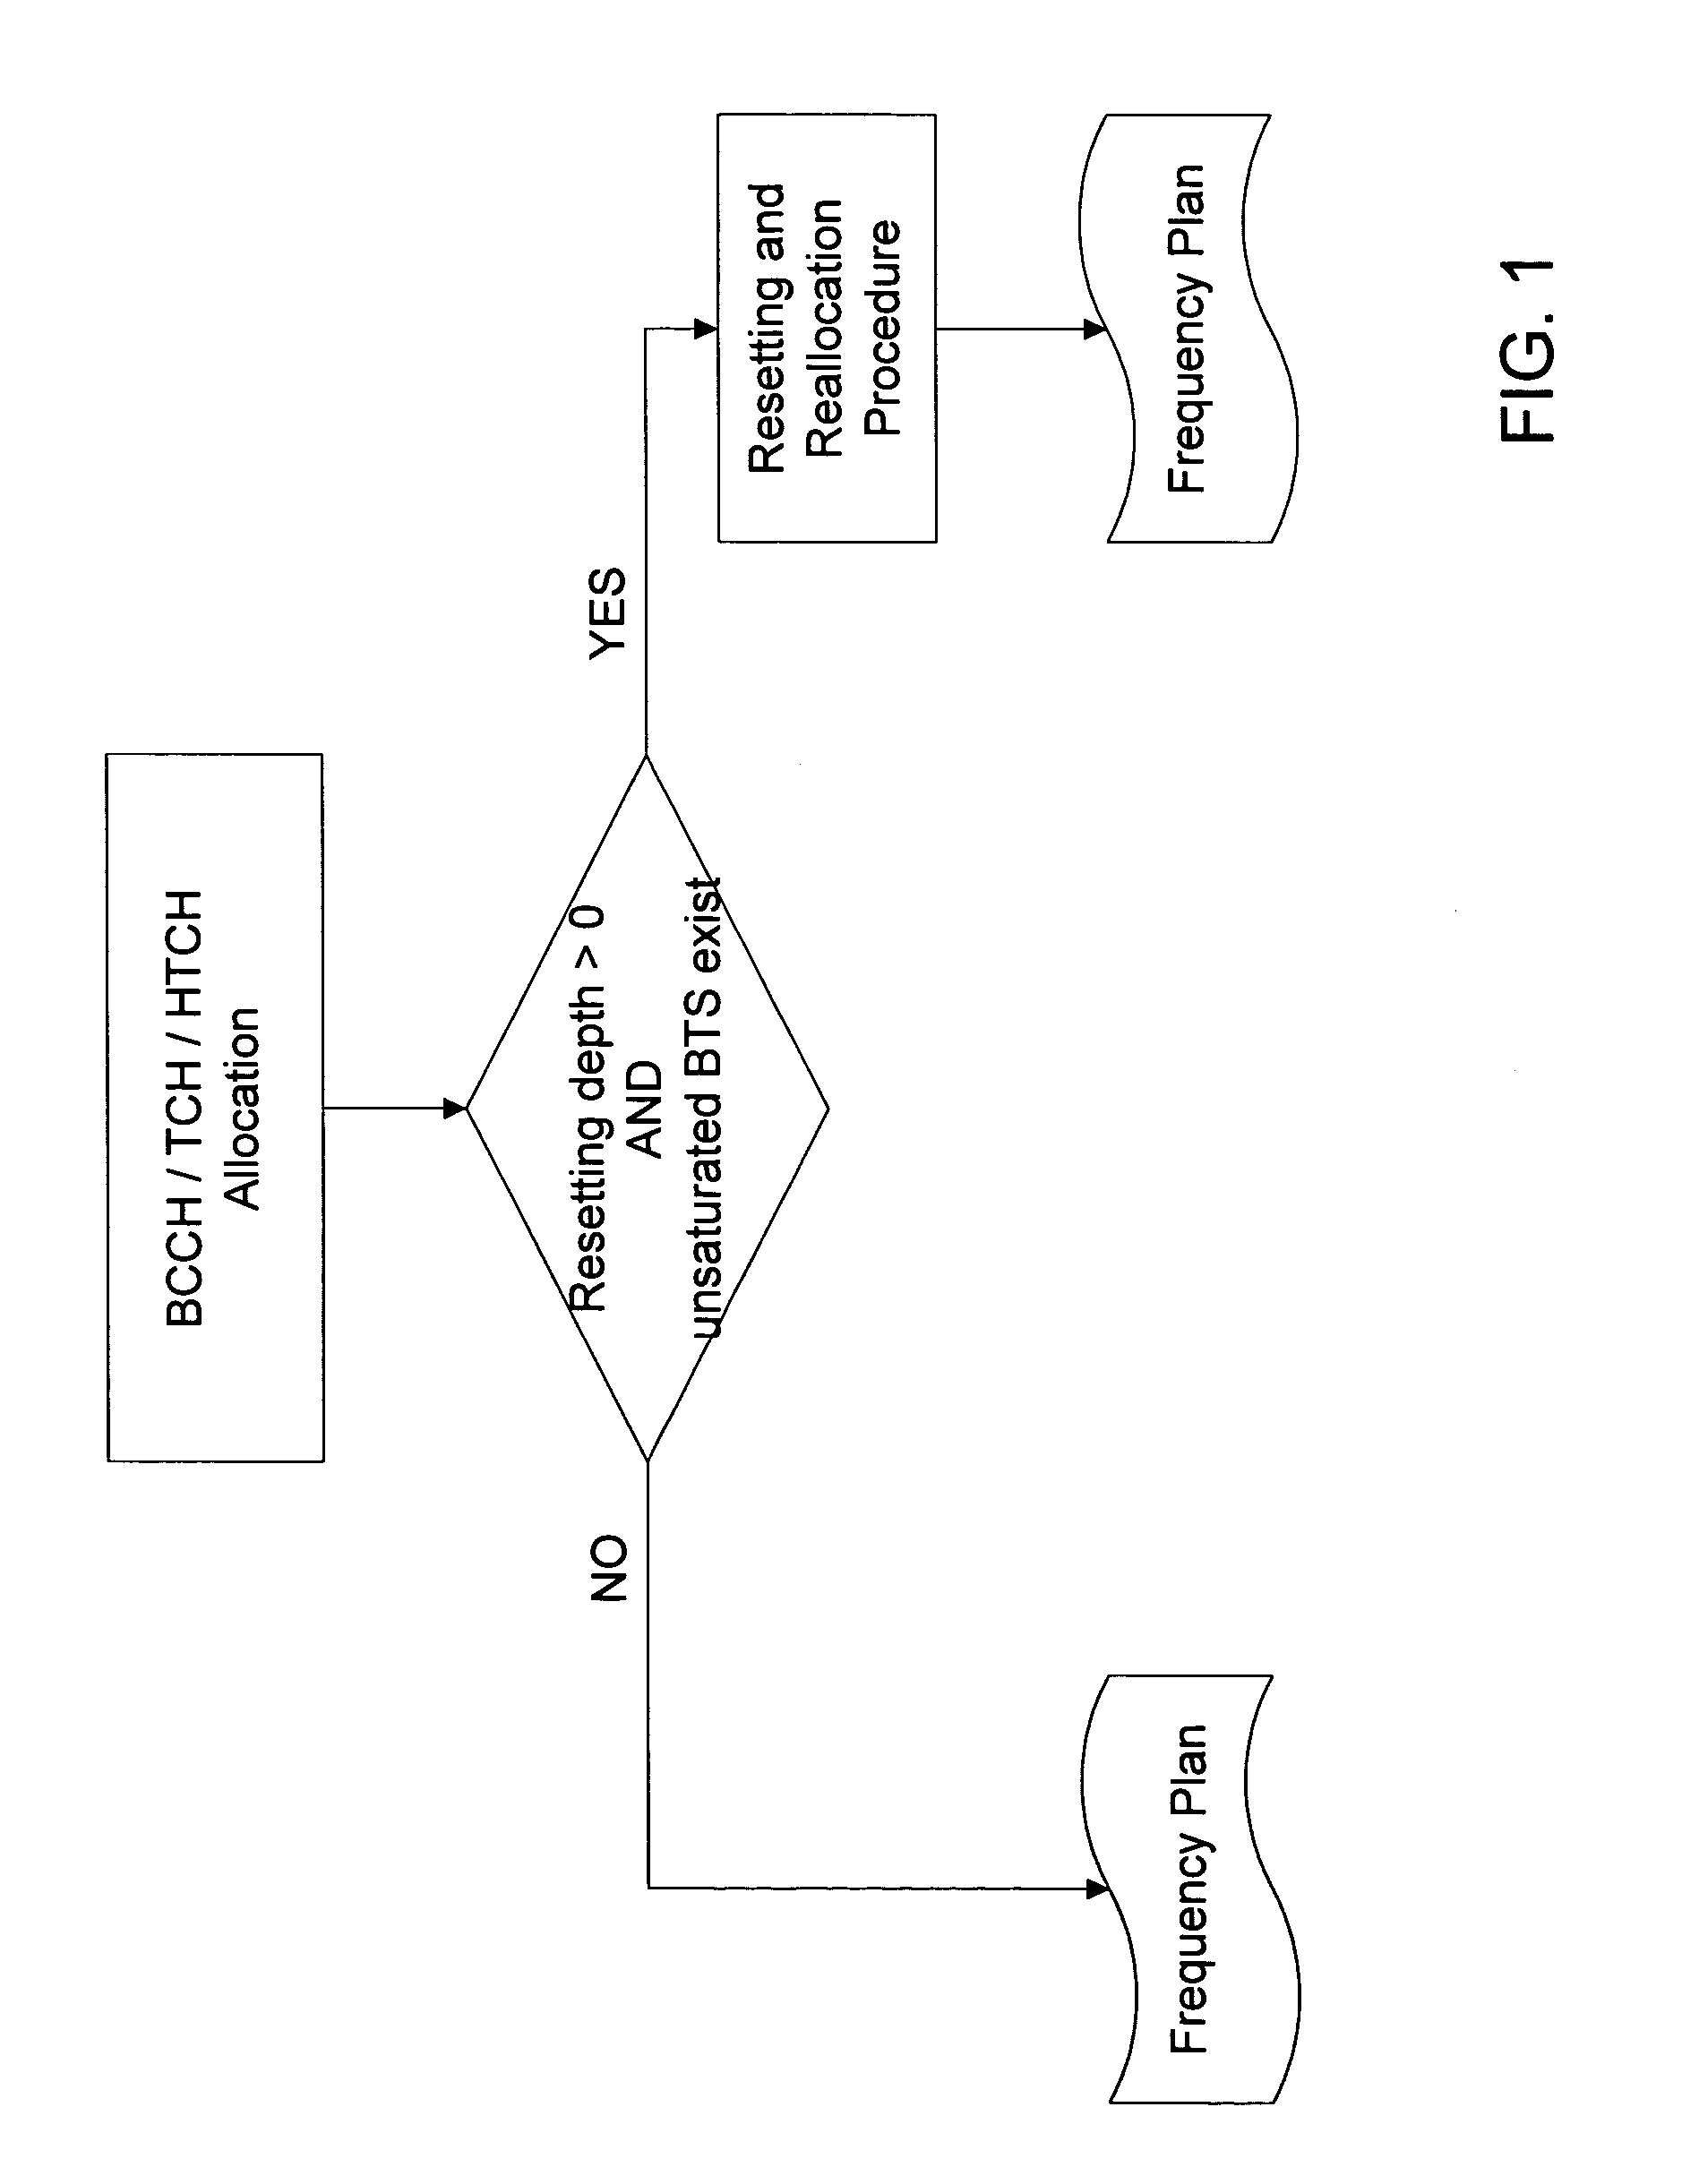 Method for assigning frequencies to base stations of a mobile telephone network